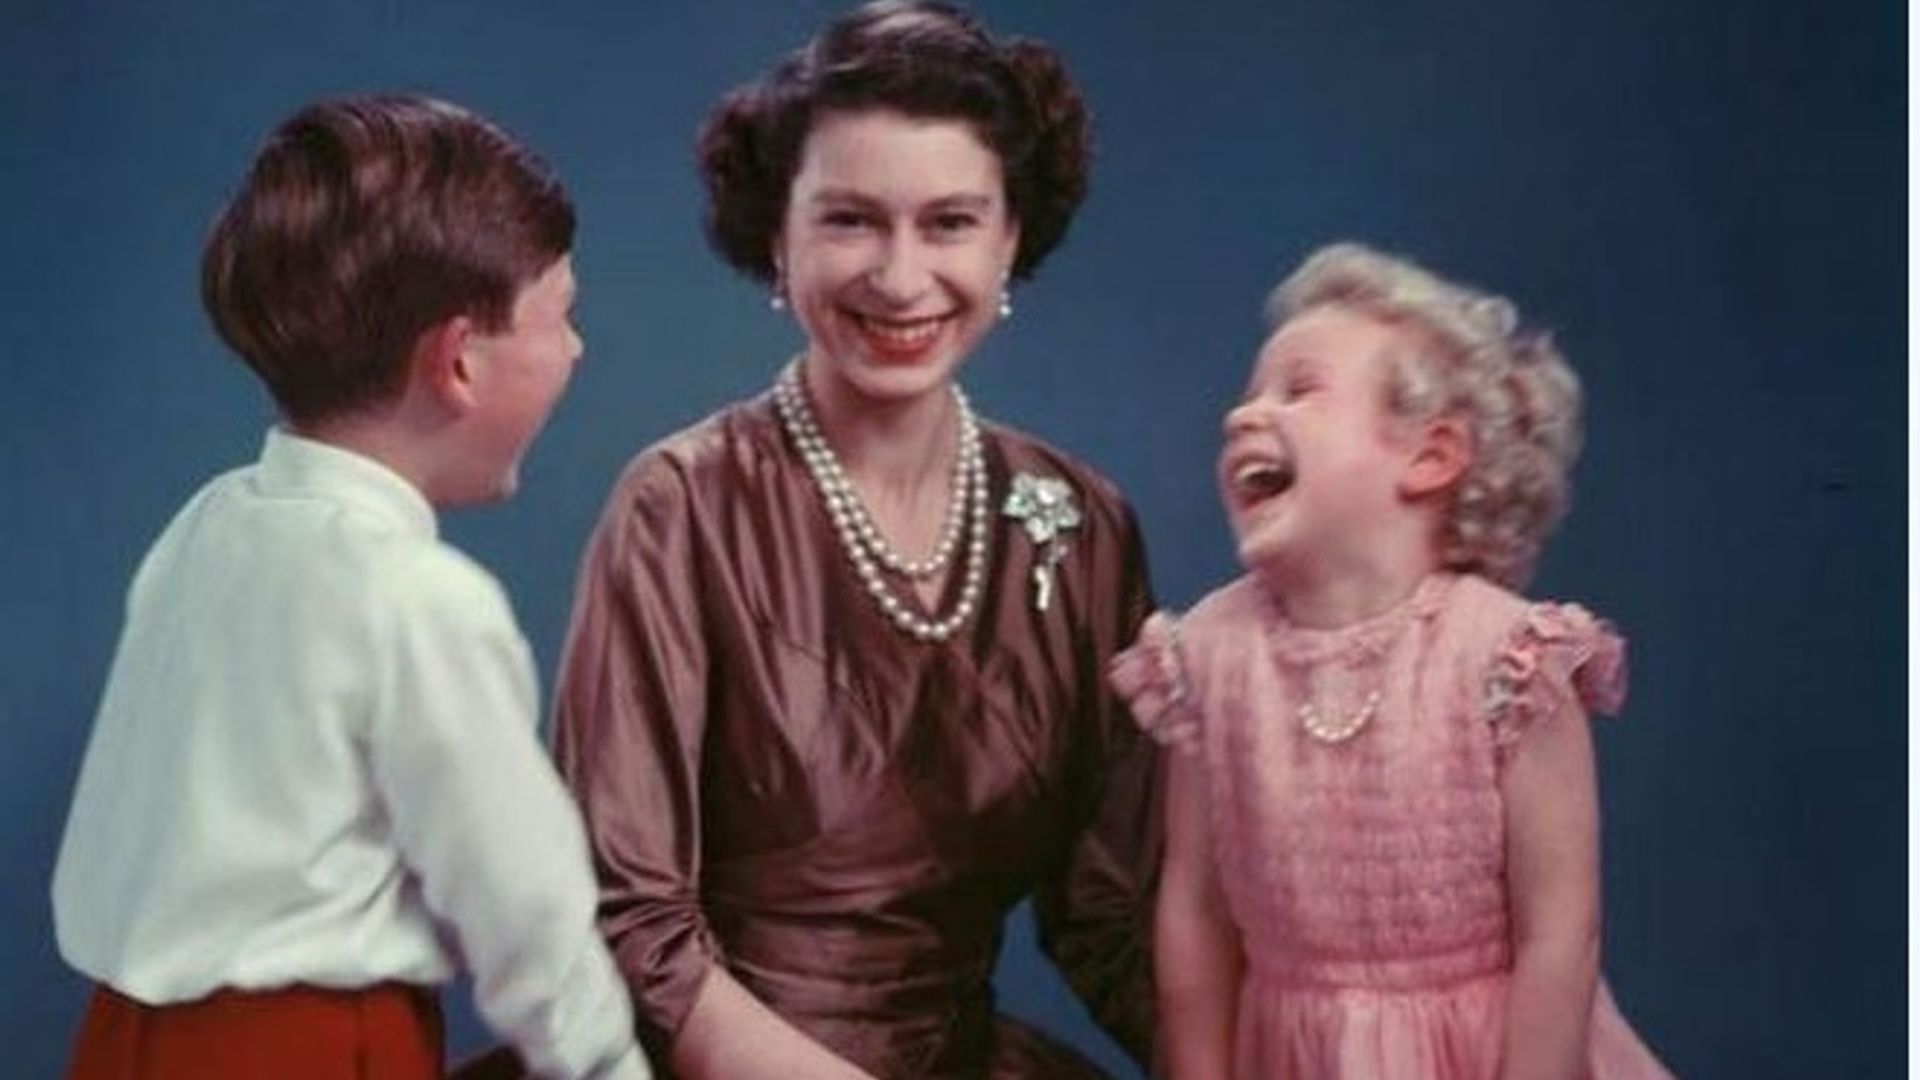 Queen Elizabeth, Prince Charles and Princess Anne share a silly moment